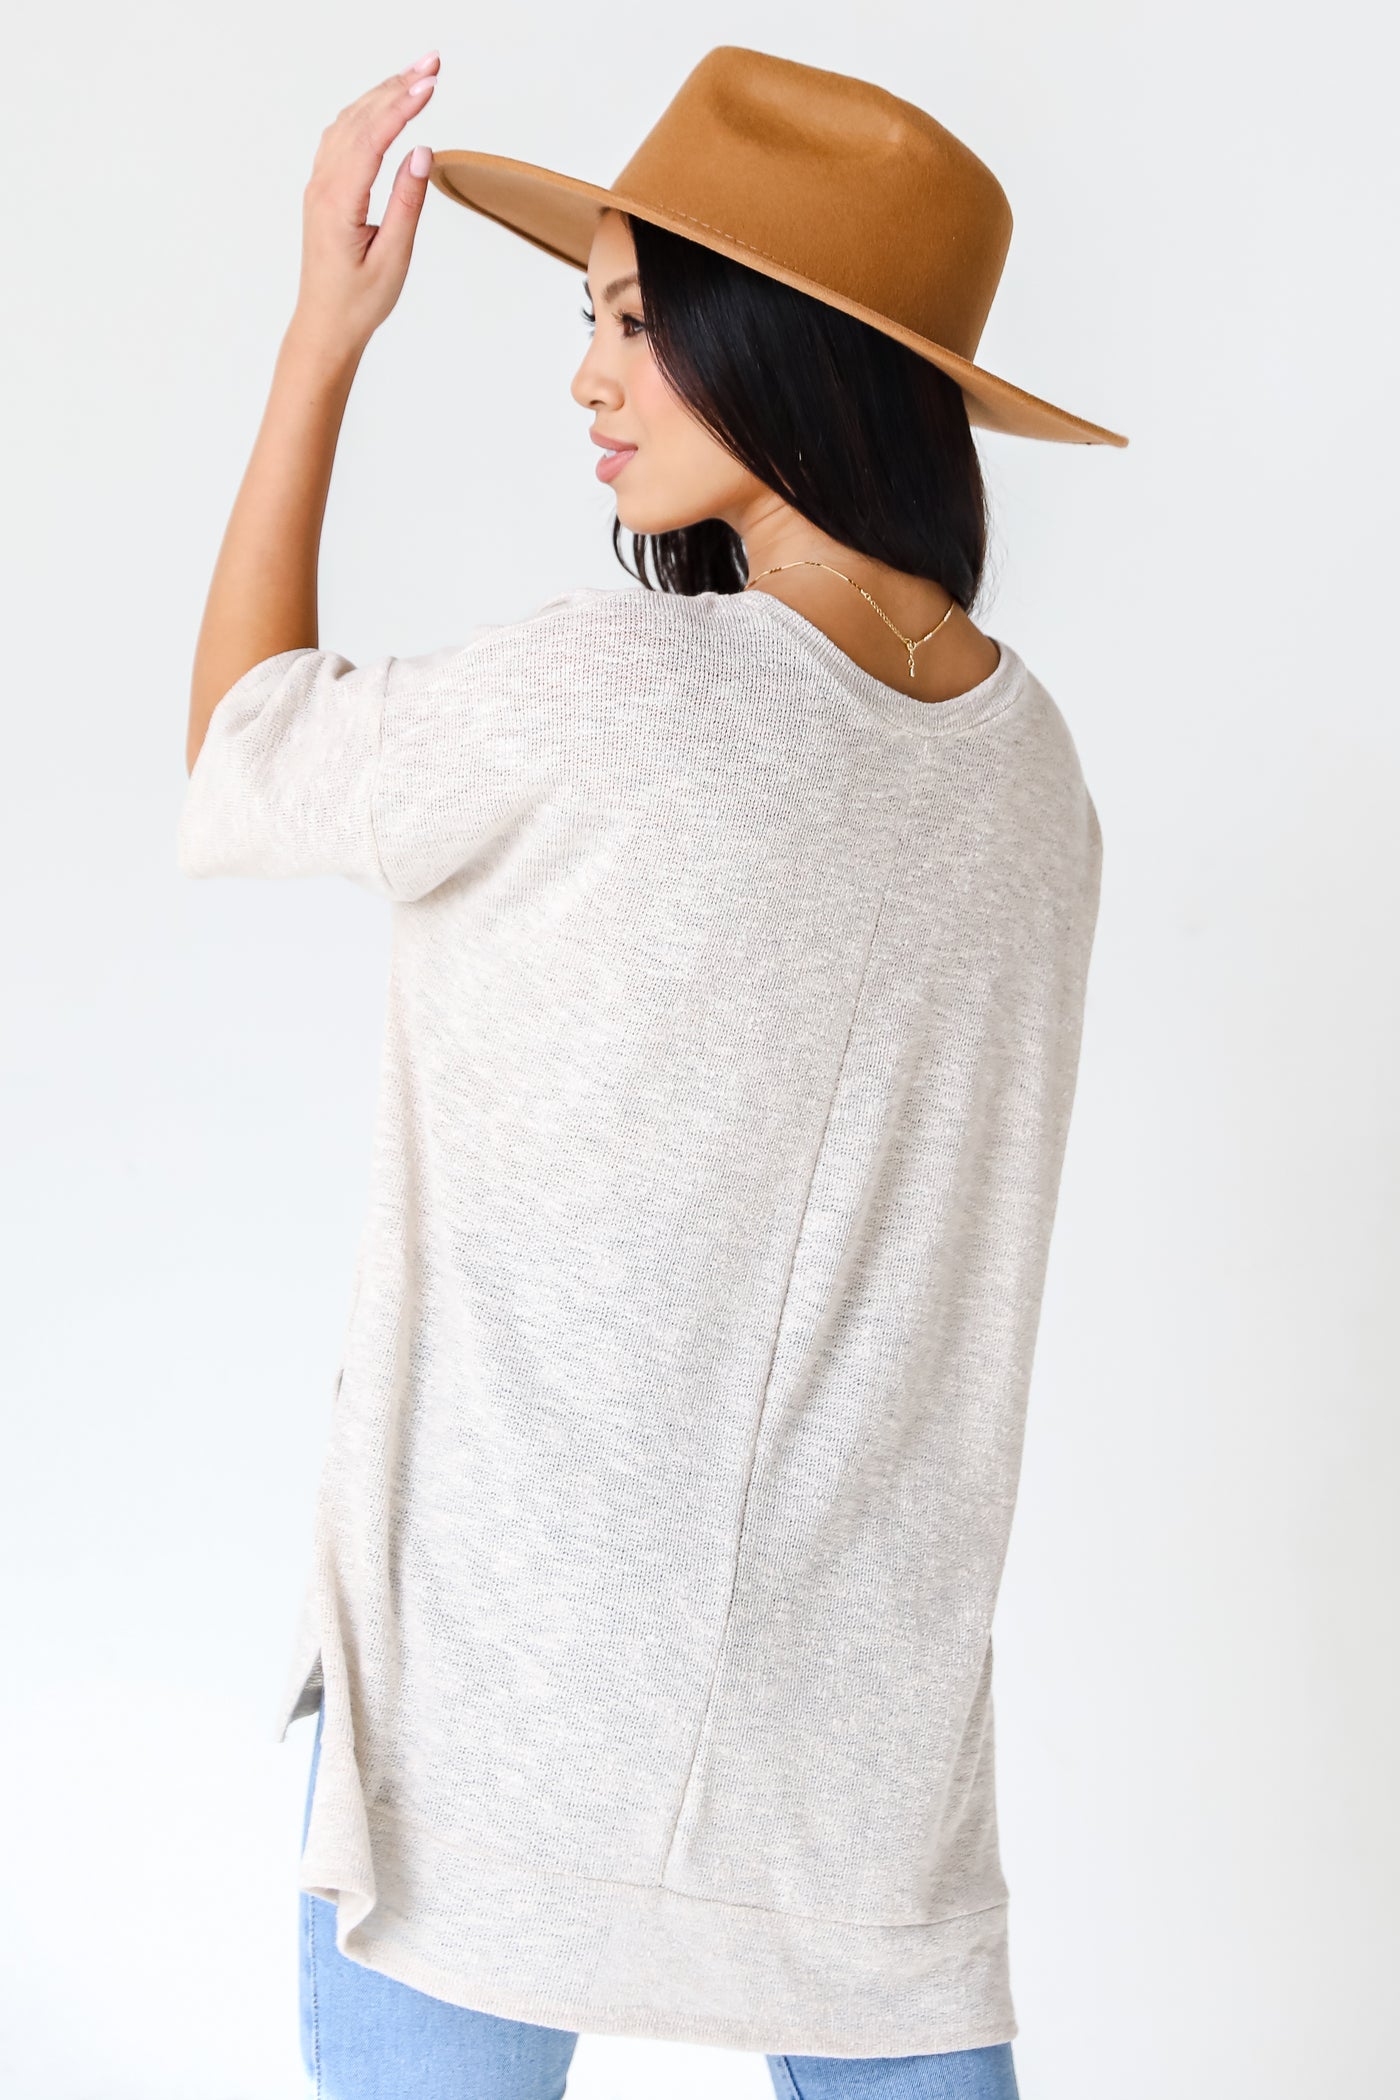 taupe Knit Tee back view